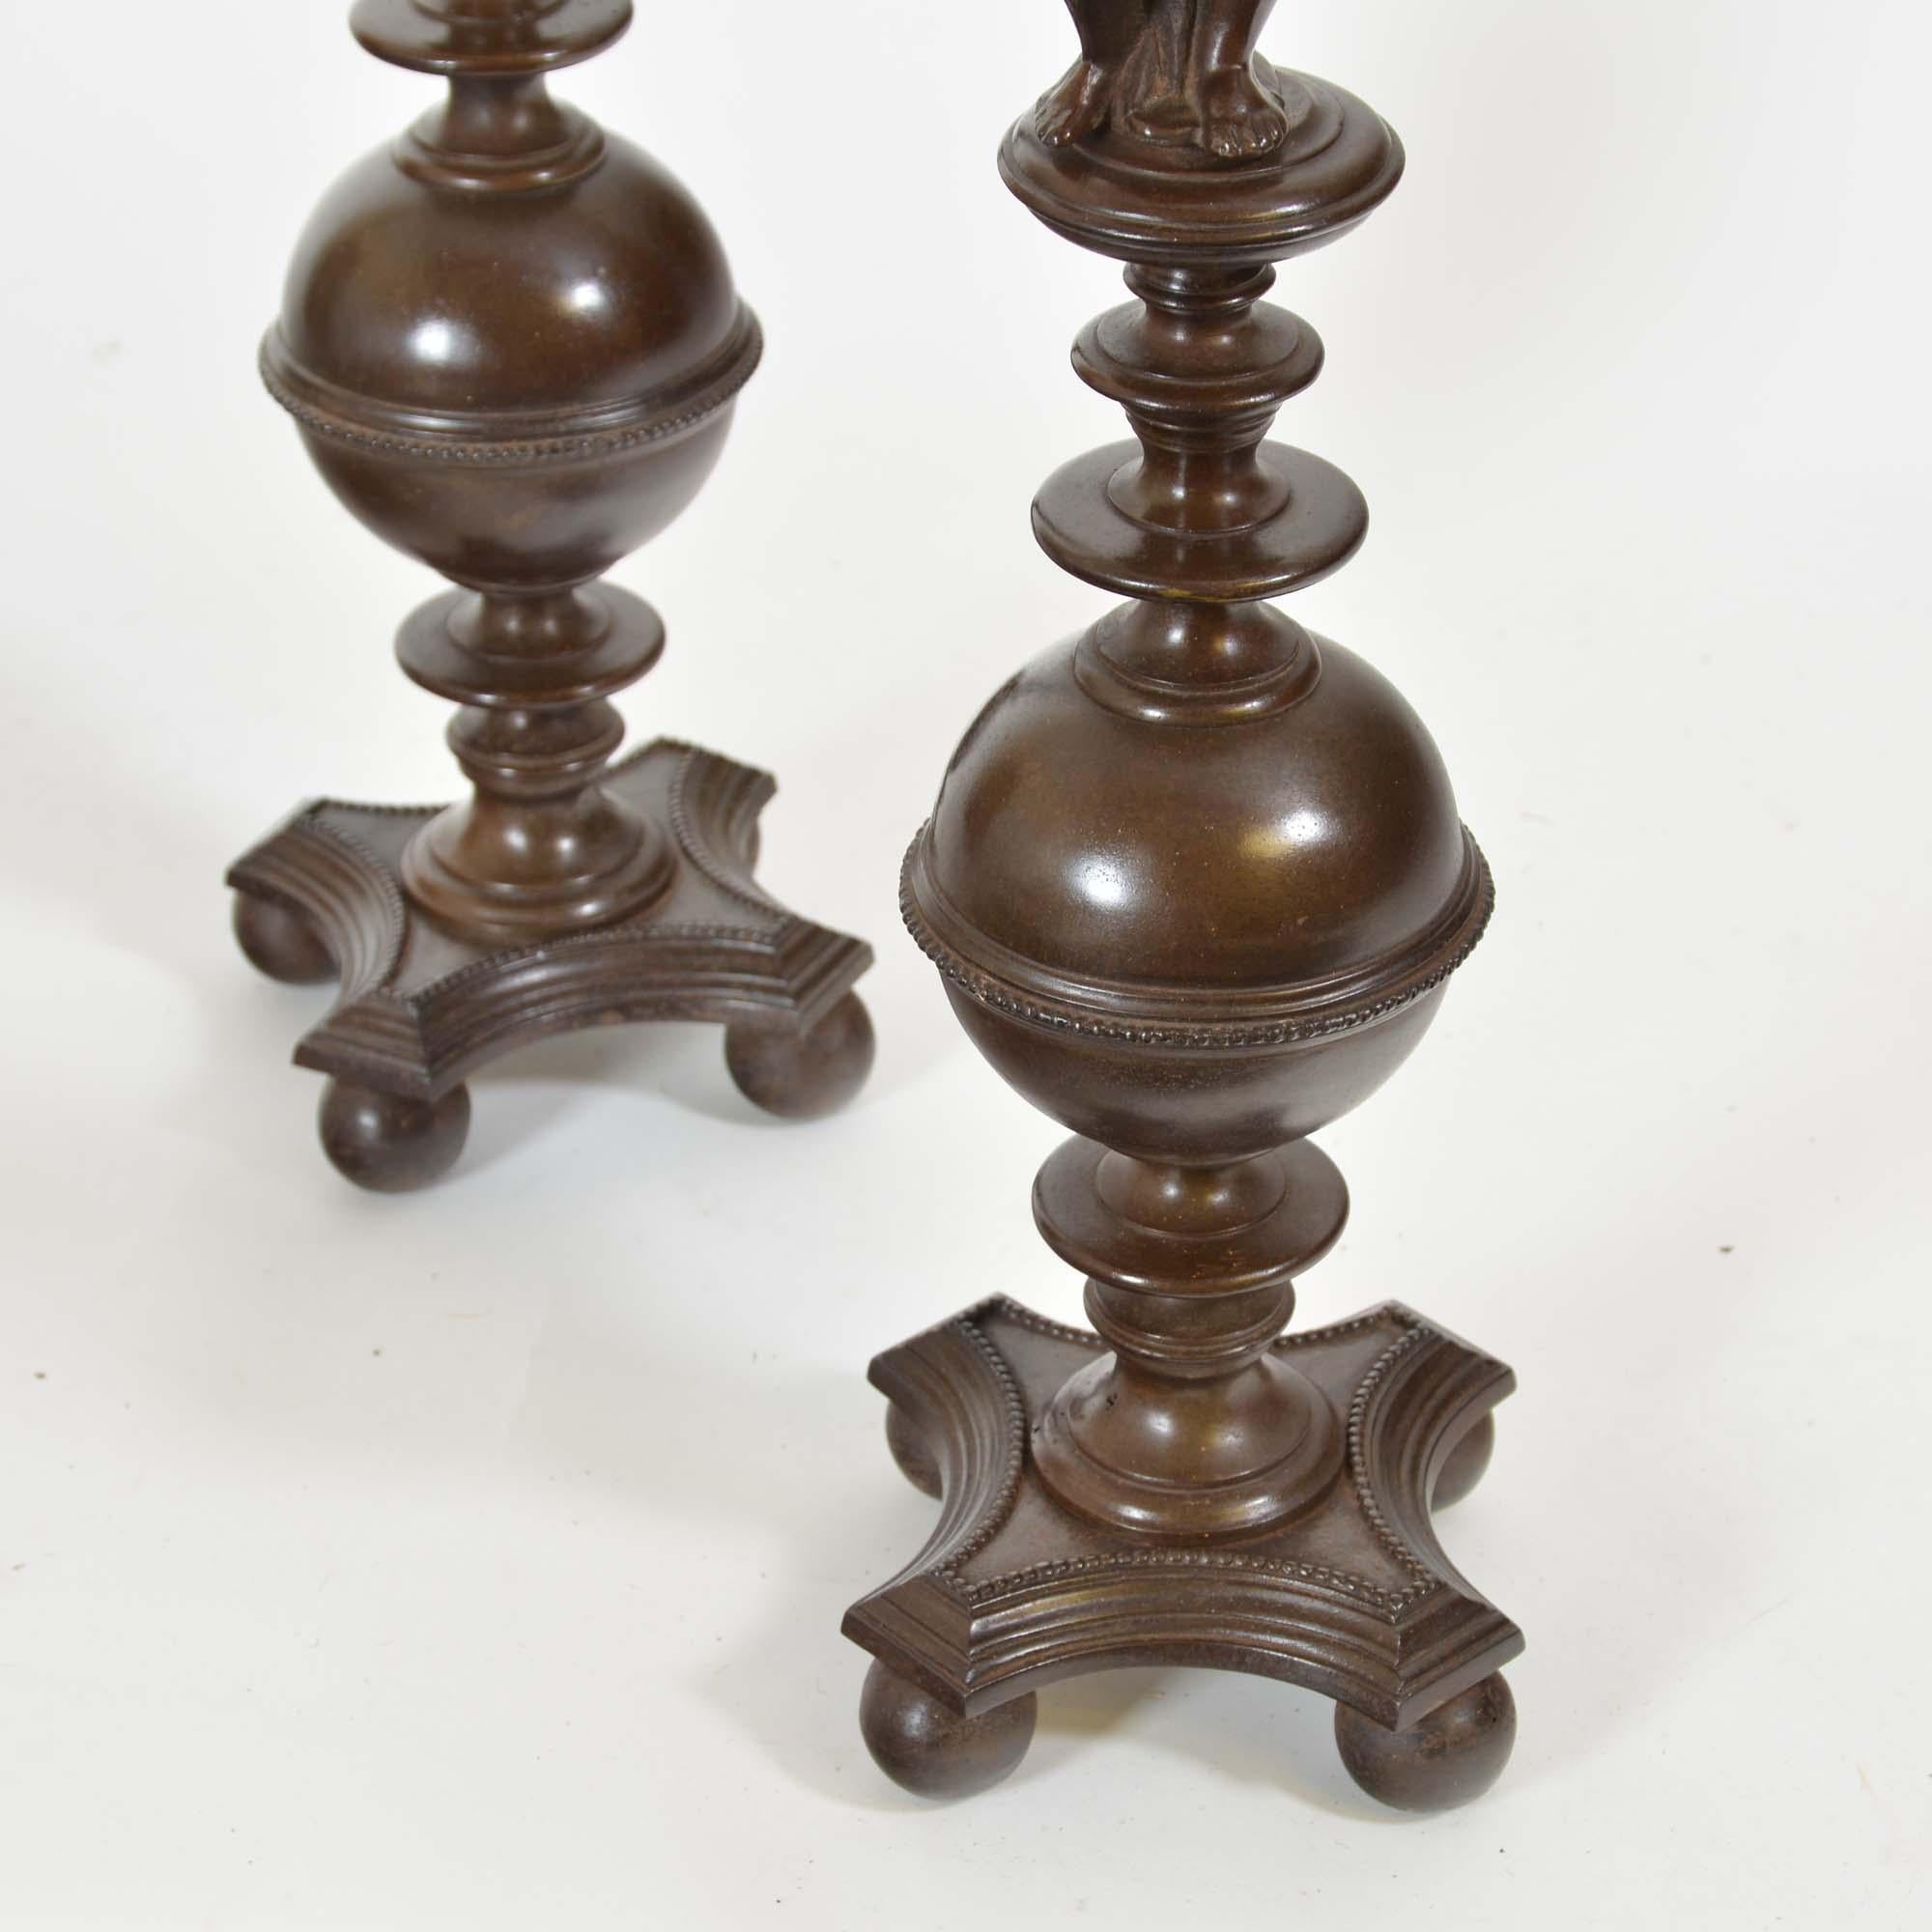 Pair of bronzed cast iron Italian Renaissance style fire andirons In Good Condition For Sale In Castle Douglas, GB